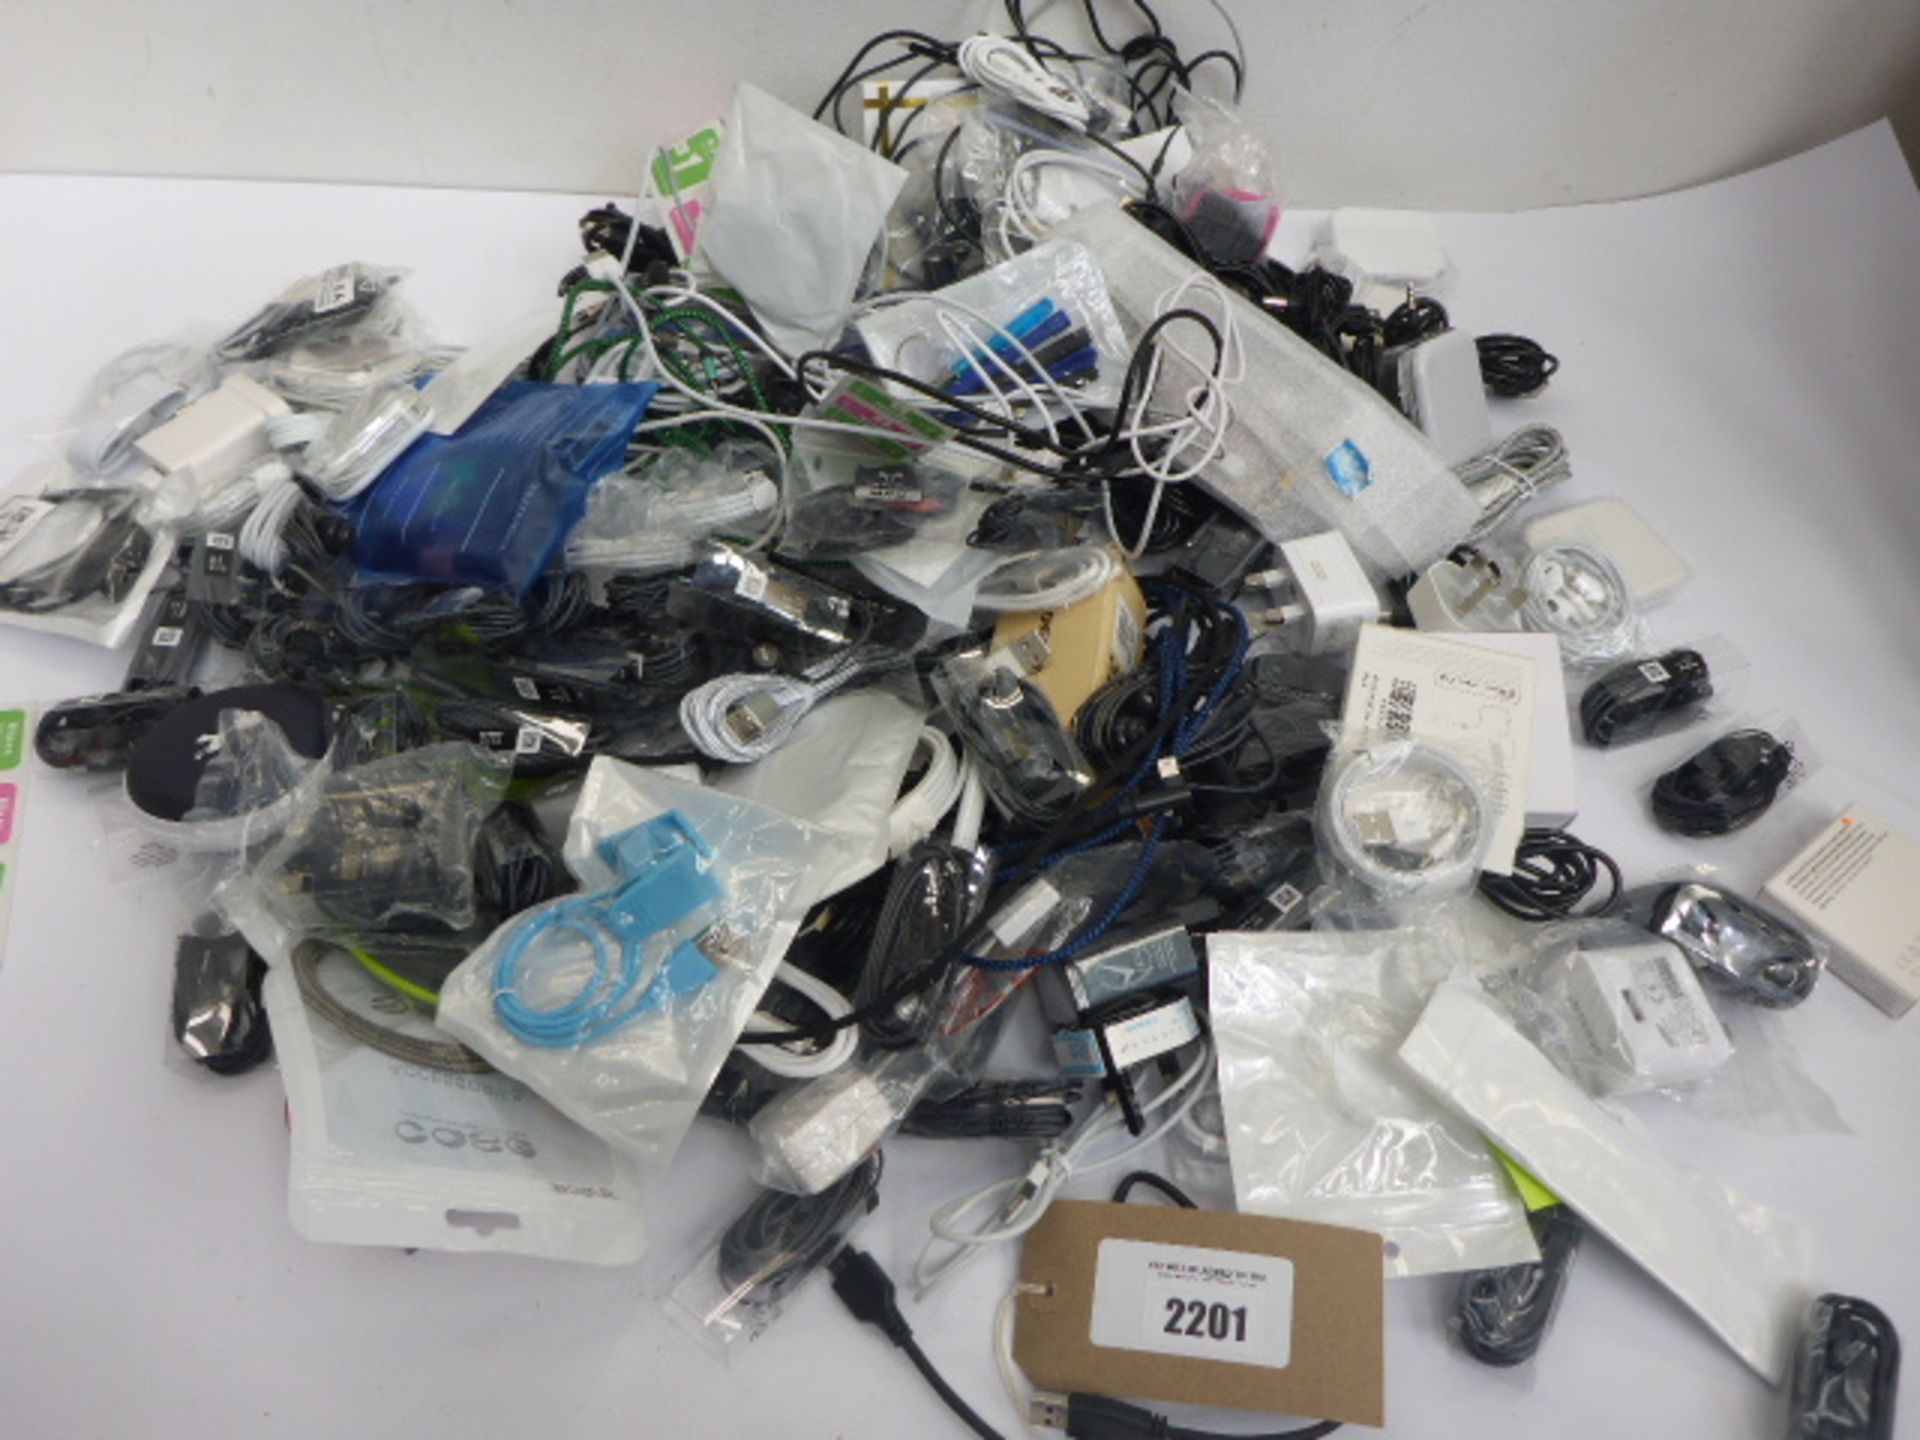 Bag containing quantity of mobile phone related accessories; cables, earphones, adapters, repair